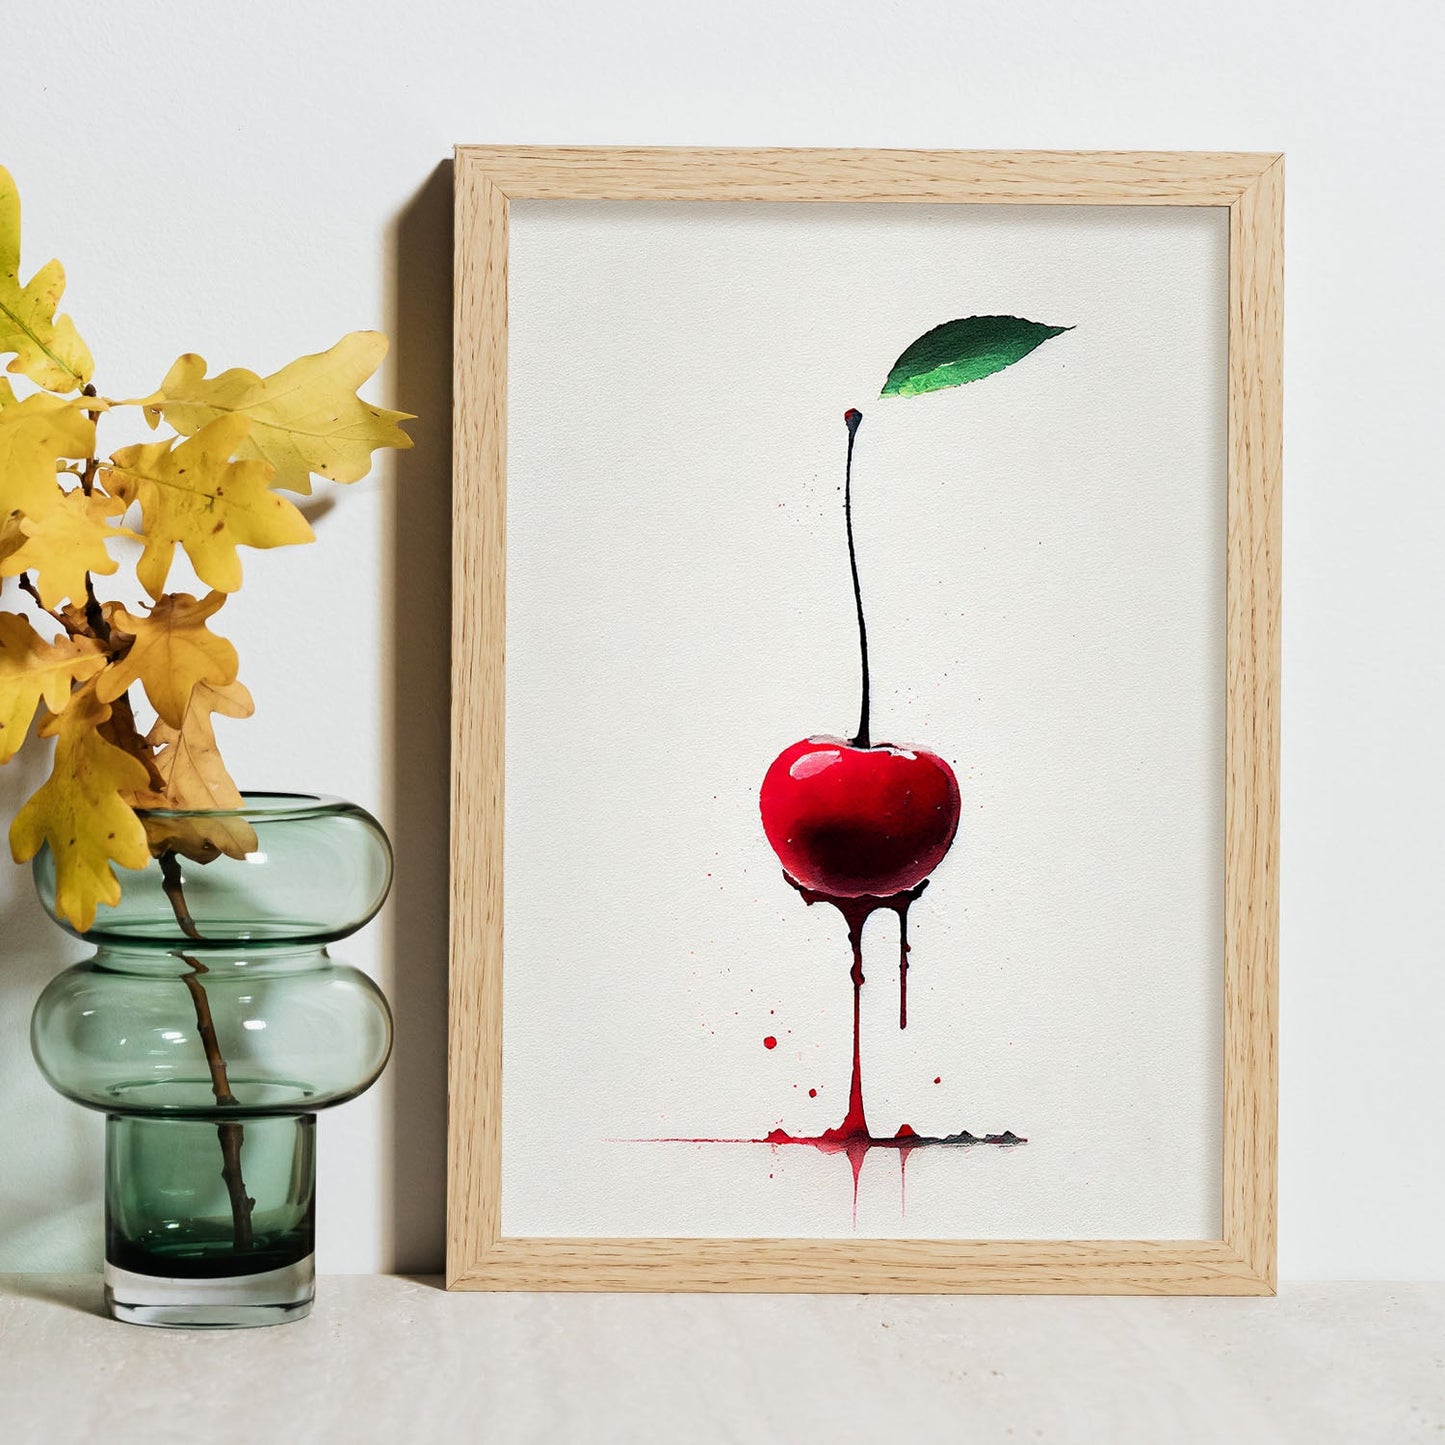 Nacnic minimalist Cherry_2. Aesthetic Wall Art Prints for Bedroom or Living Room Design.